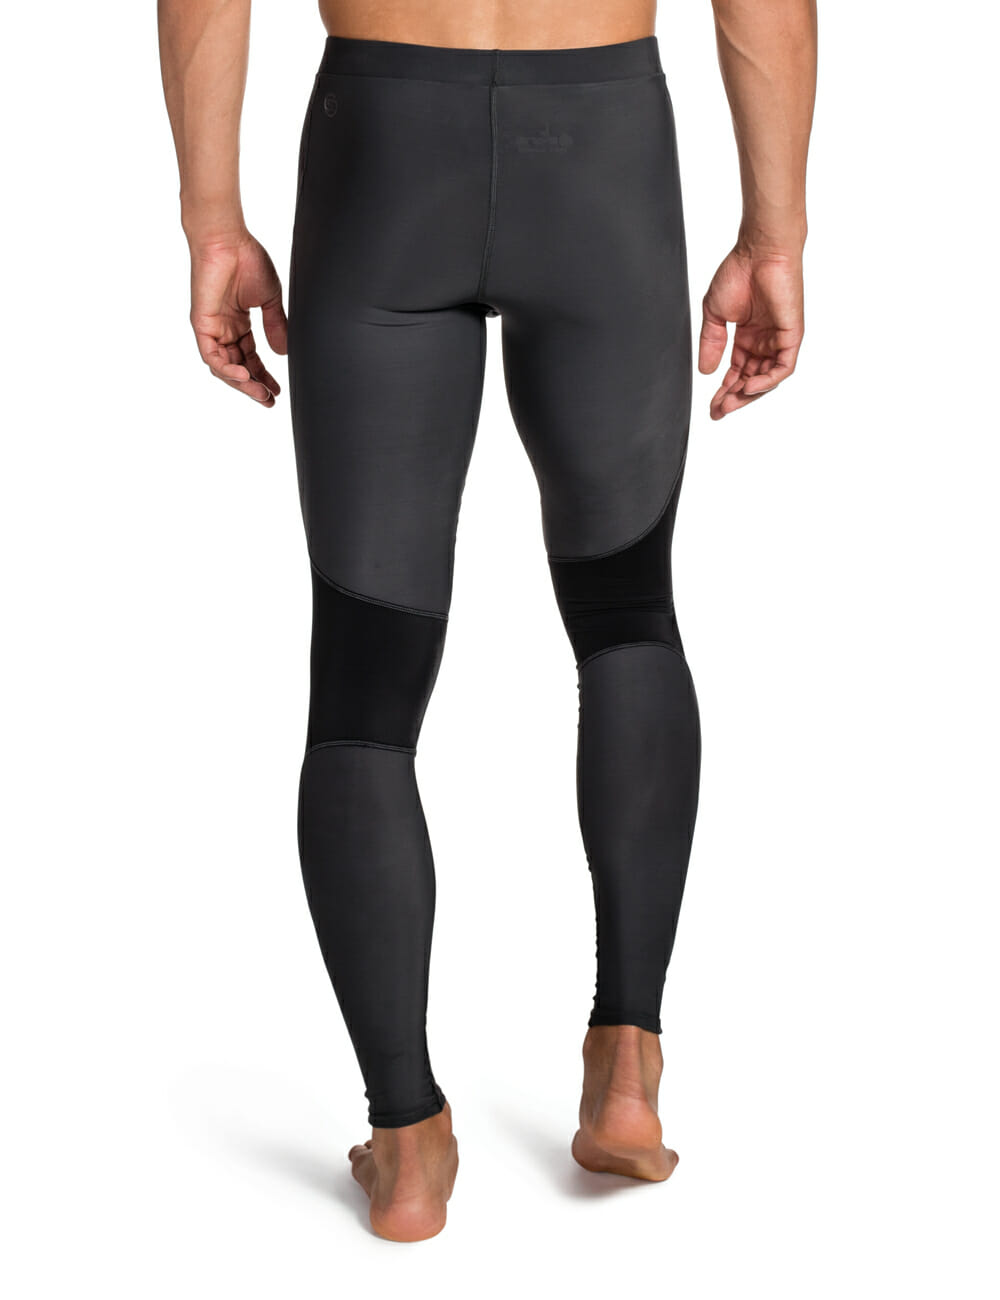 RY400 Men's Compression Long Tights M